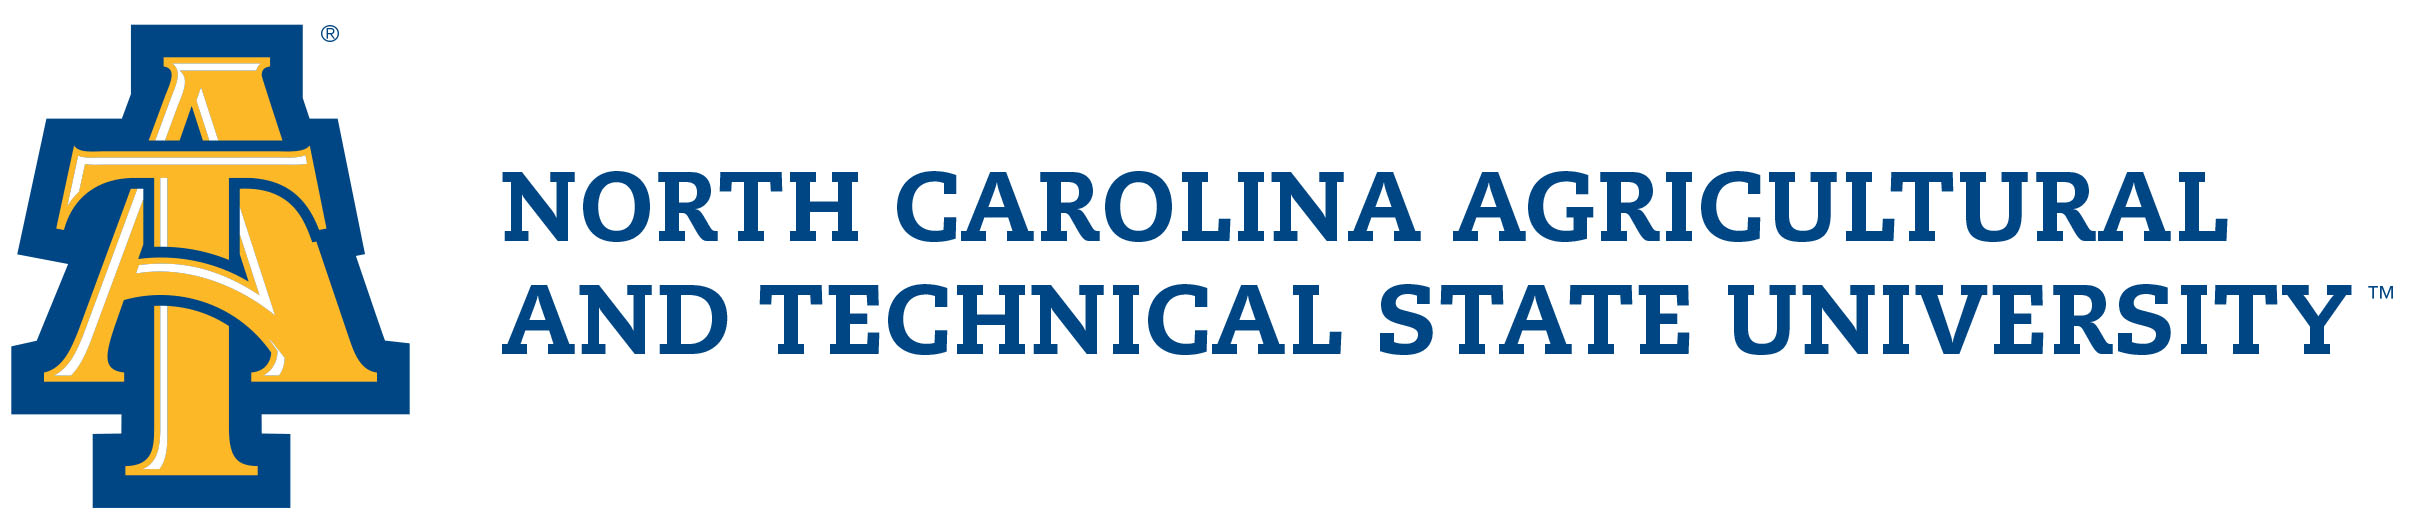 North Carolina Argicultural and Technical State University